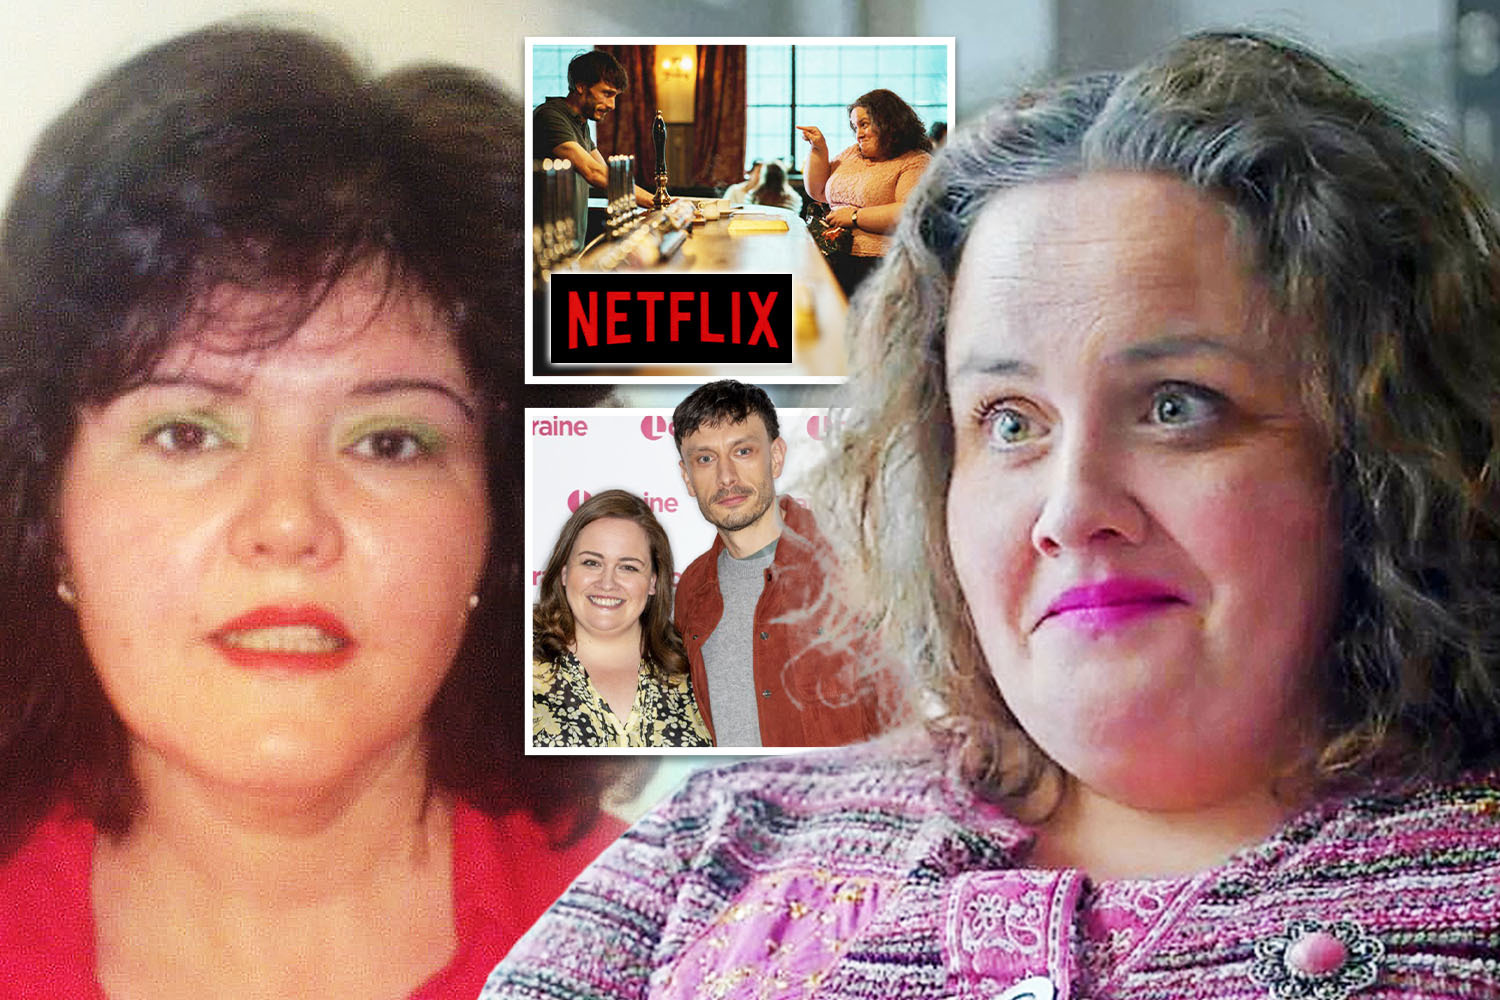 'Baby Reindeer stalker' complains 'fat actress is meant to be me'